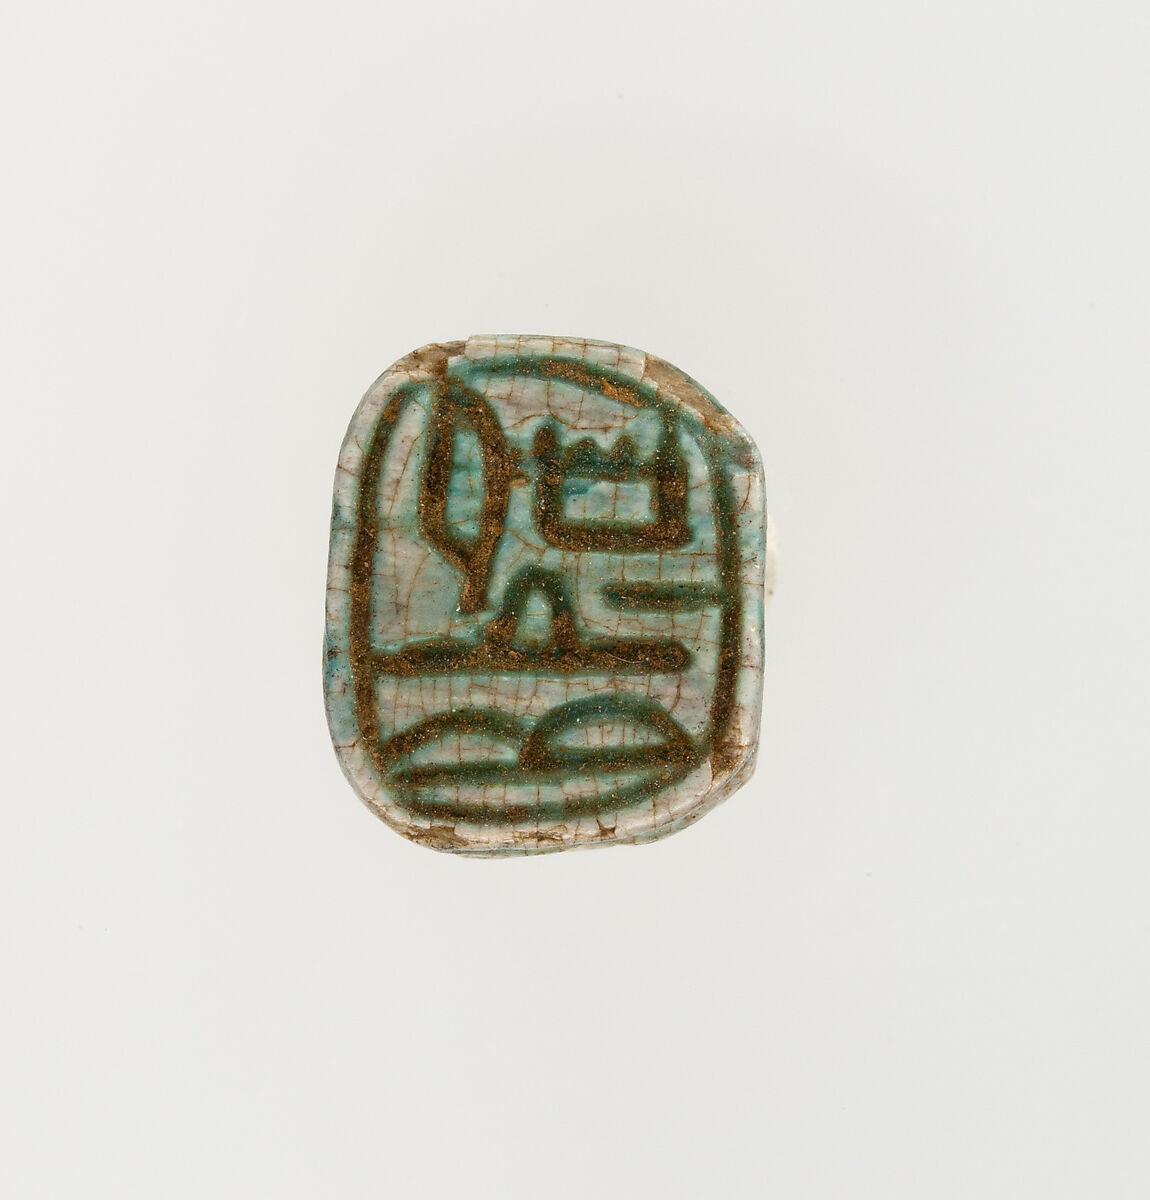 Scarab Inscribed with the Name Amenhotep, Steatite, glazed 